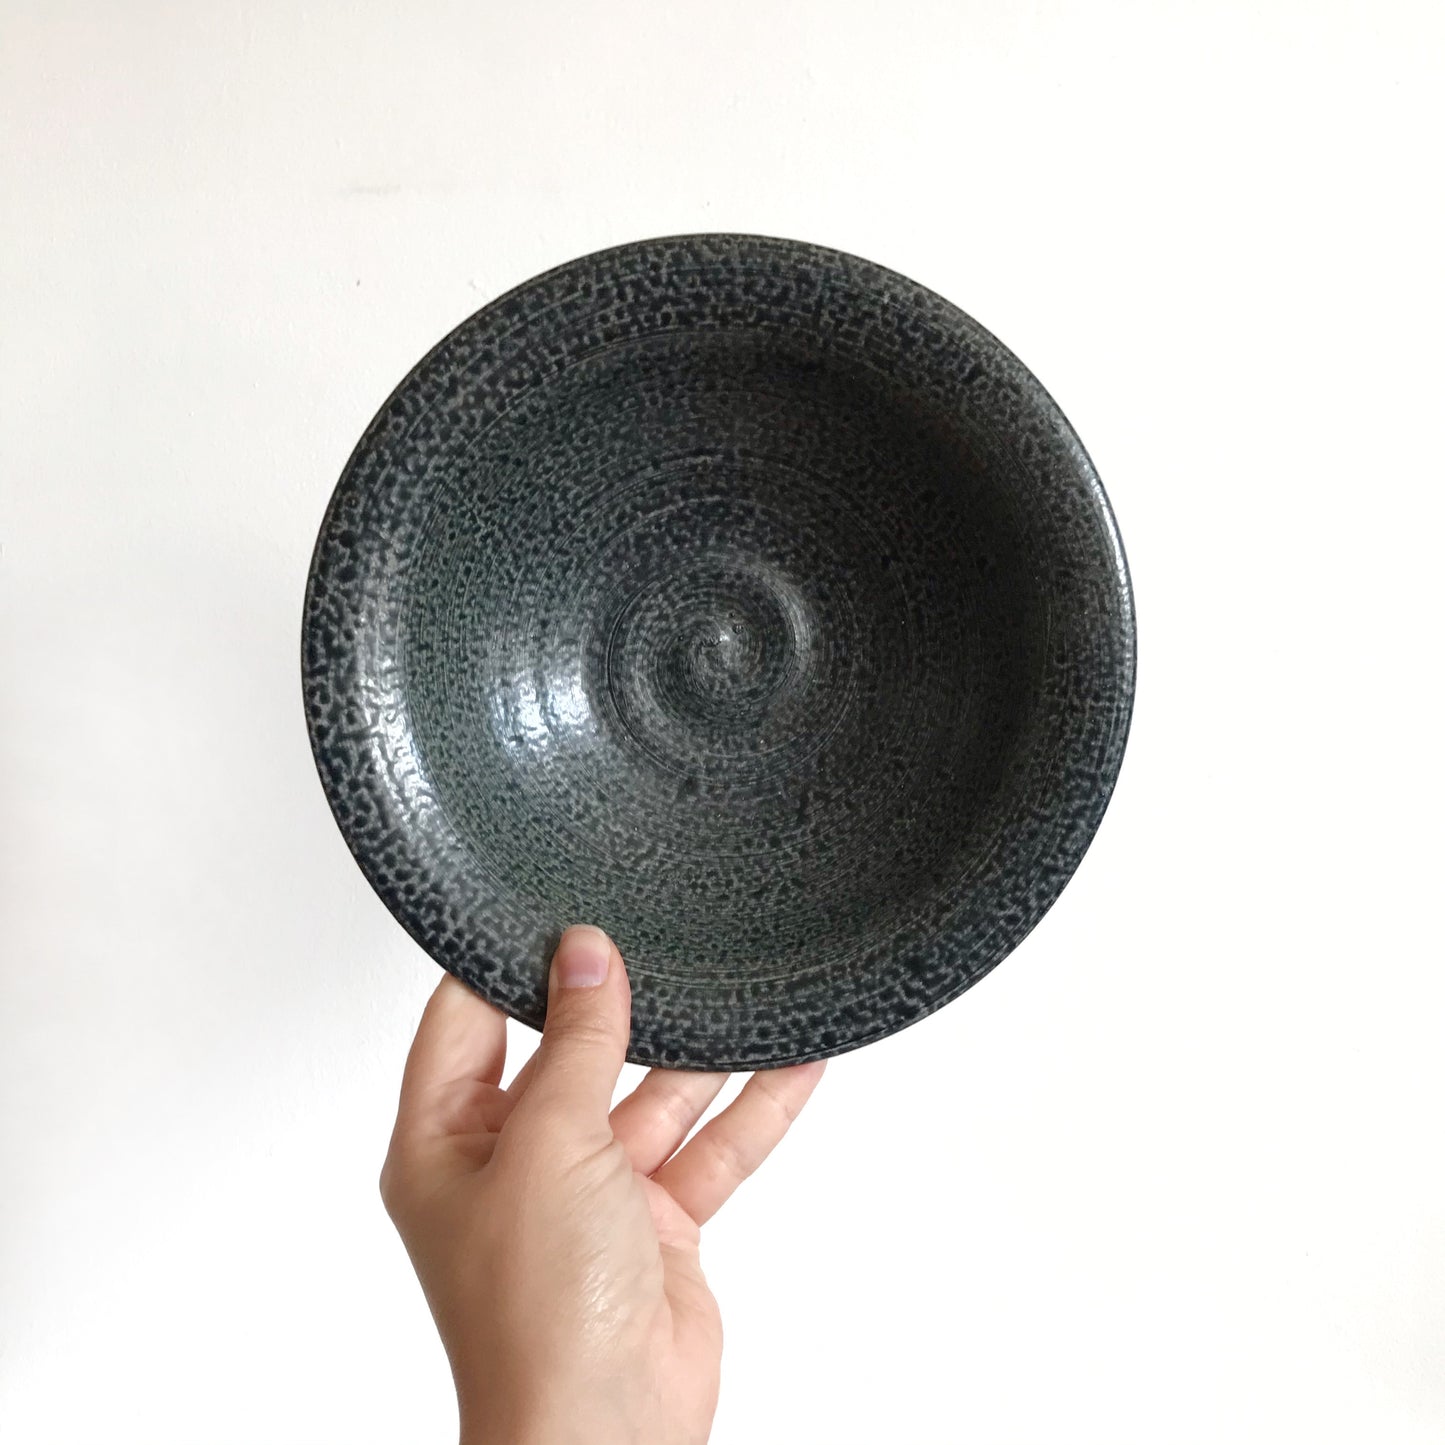 Blue Textured Pottery Bowl